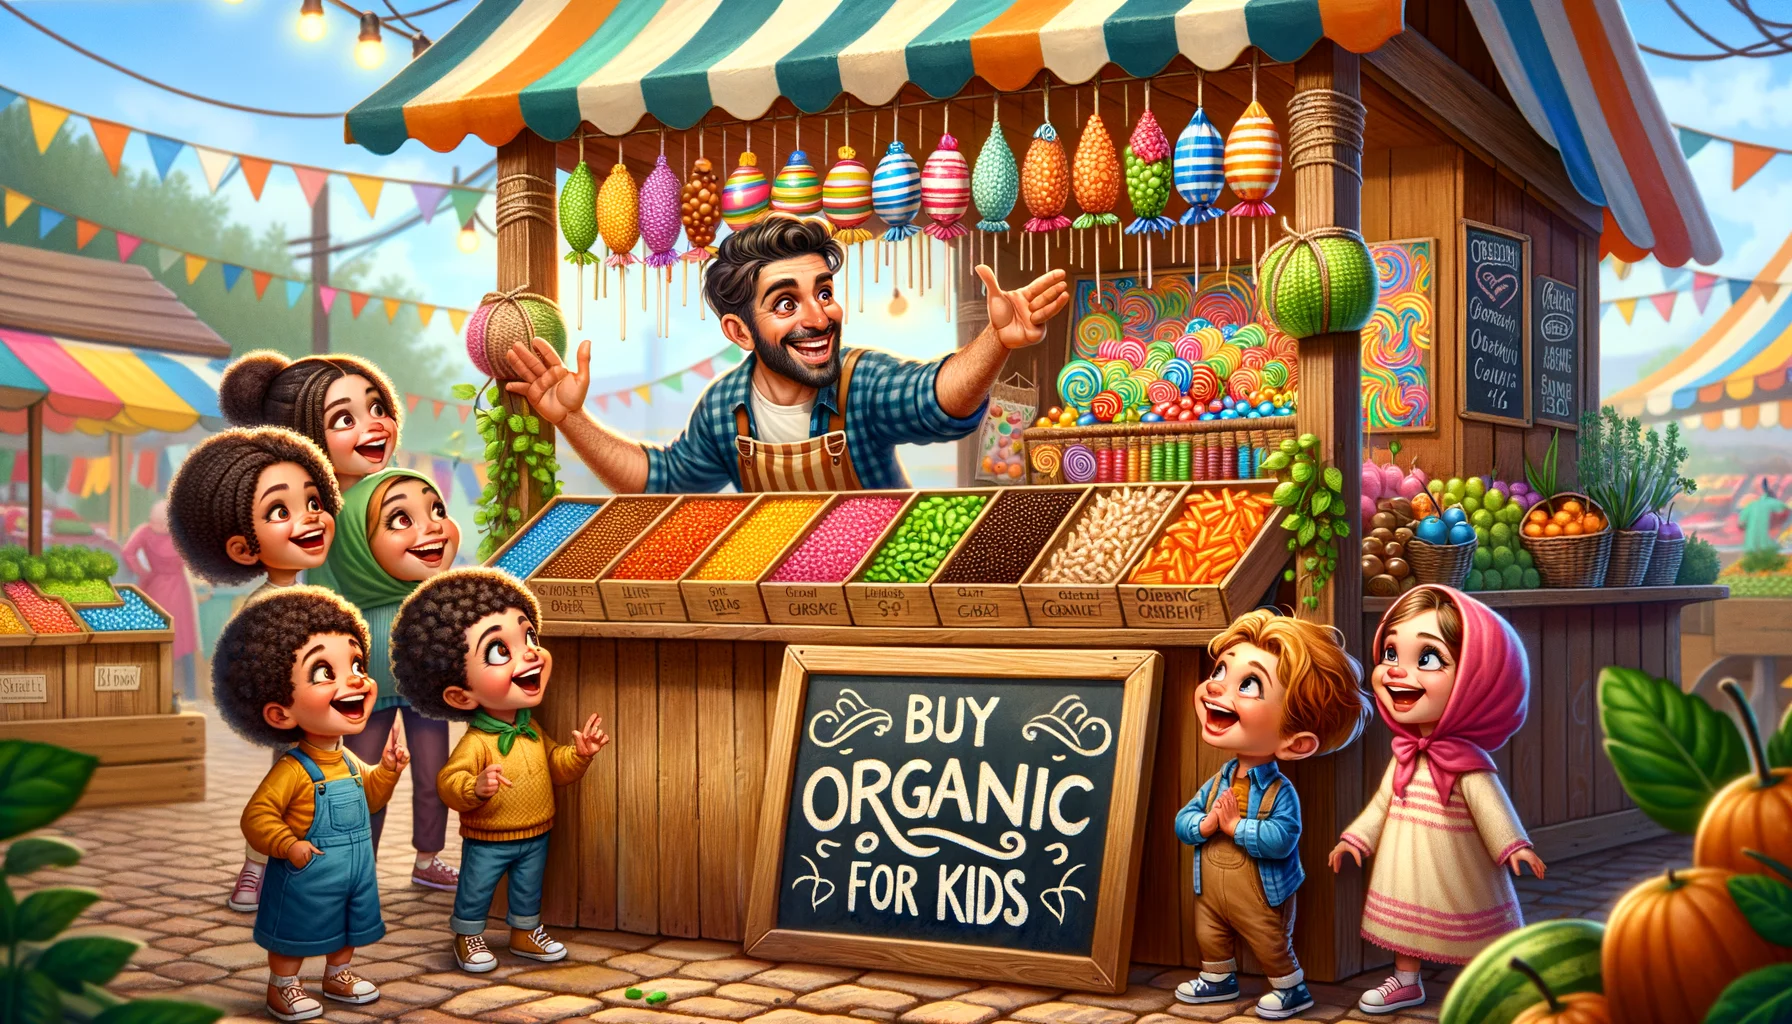 Create a humorous, realistic setting in a bustling colorful farmer's market. In this image, there's a hand-painted wooden stall meticulously designed with vibrant organic candies hanging in strings and bundles. A friendly Hispanic male vendor is enthusiastically advertising his products while kids of various descents and genders, like a Middle Eastern girl, a Caucasian boy and others, are marveling with wide-eyed amazement and laughter. A huge chalkboard sign, written with artistic flair, proudly proclaims 'Buy Organic Candy for Kids' catching the visitors' attention.